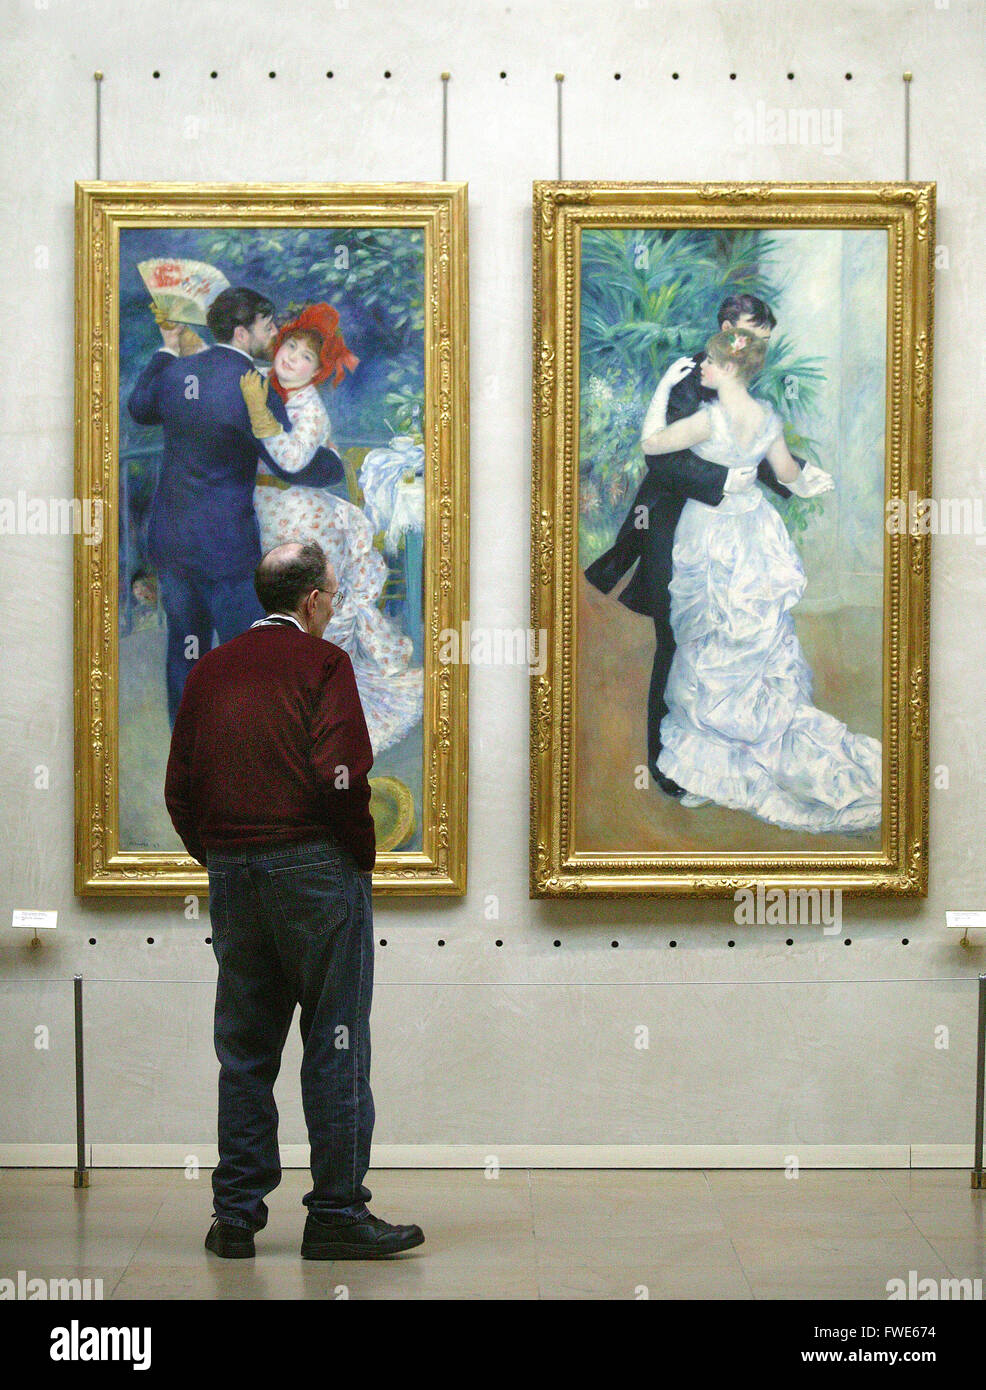 PARIS,France: Musée D'Orsay with paintings of Auguste Renoir Stock Photo - Alamy